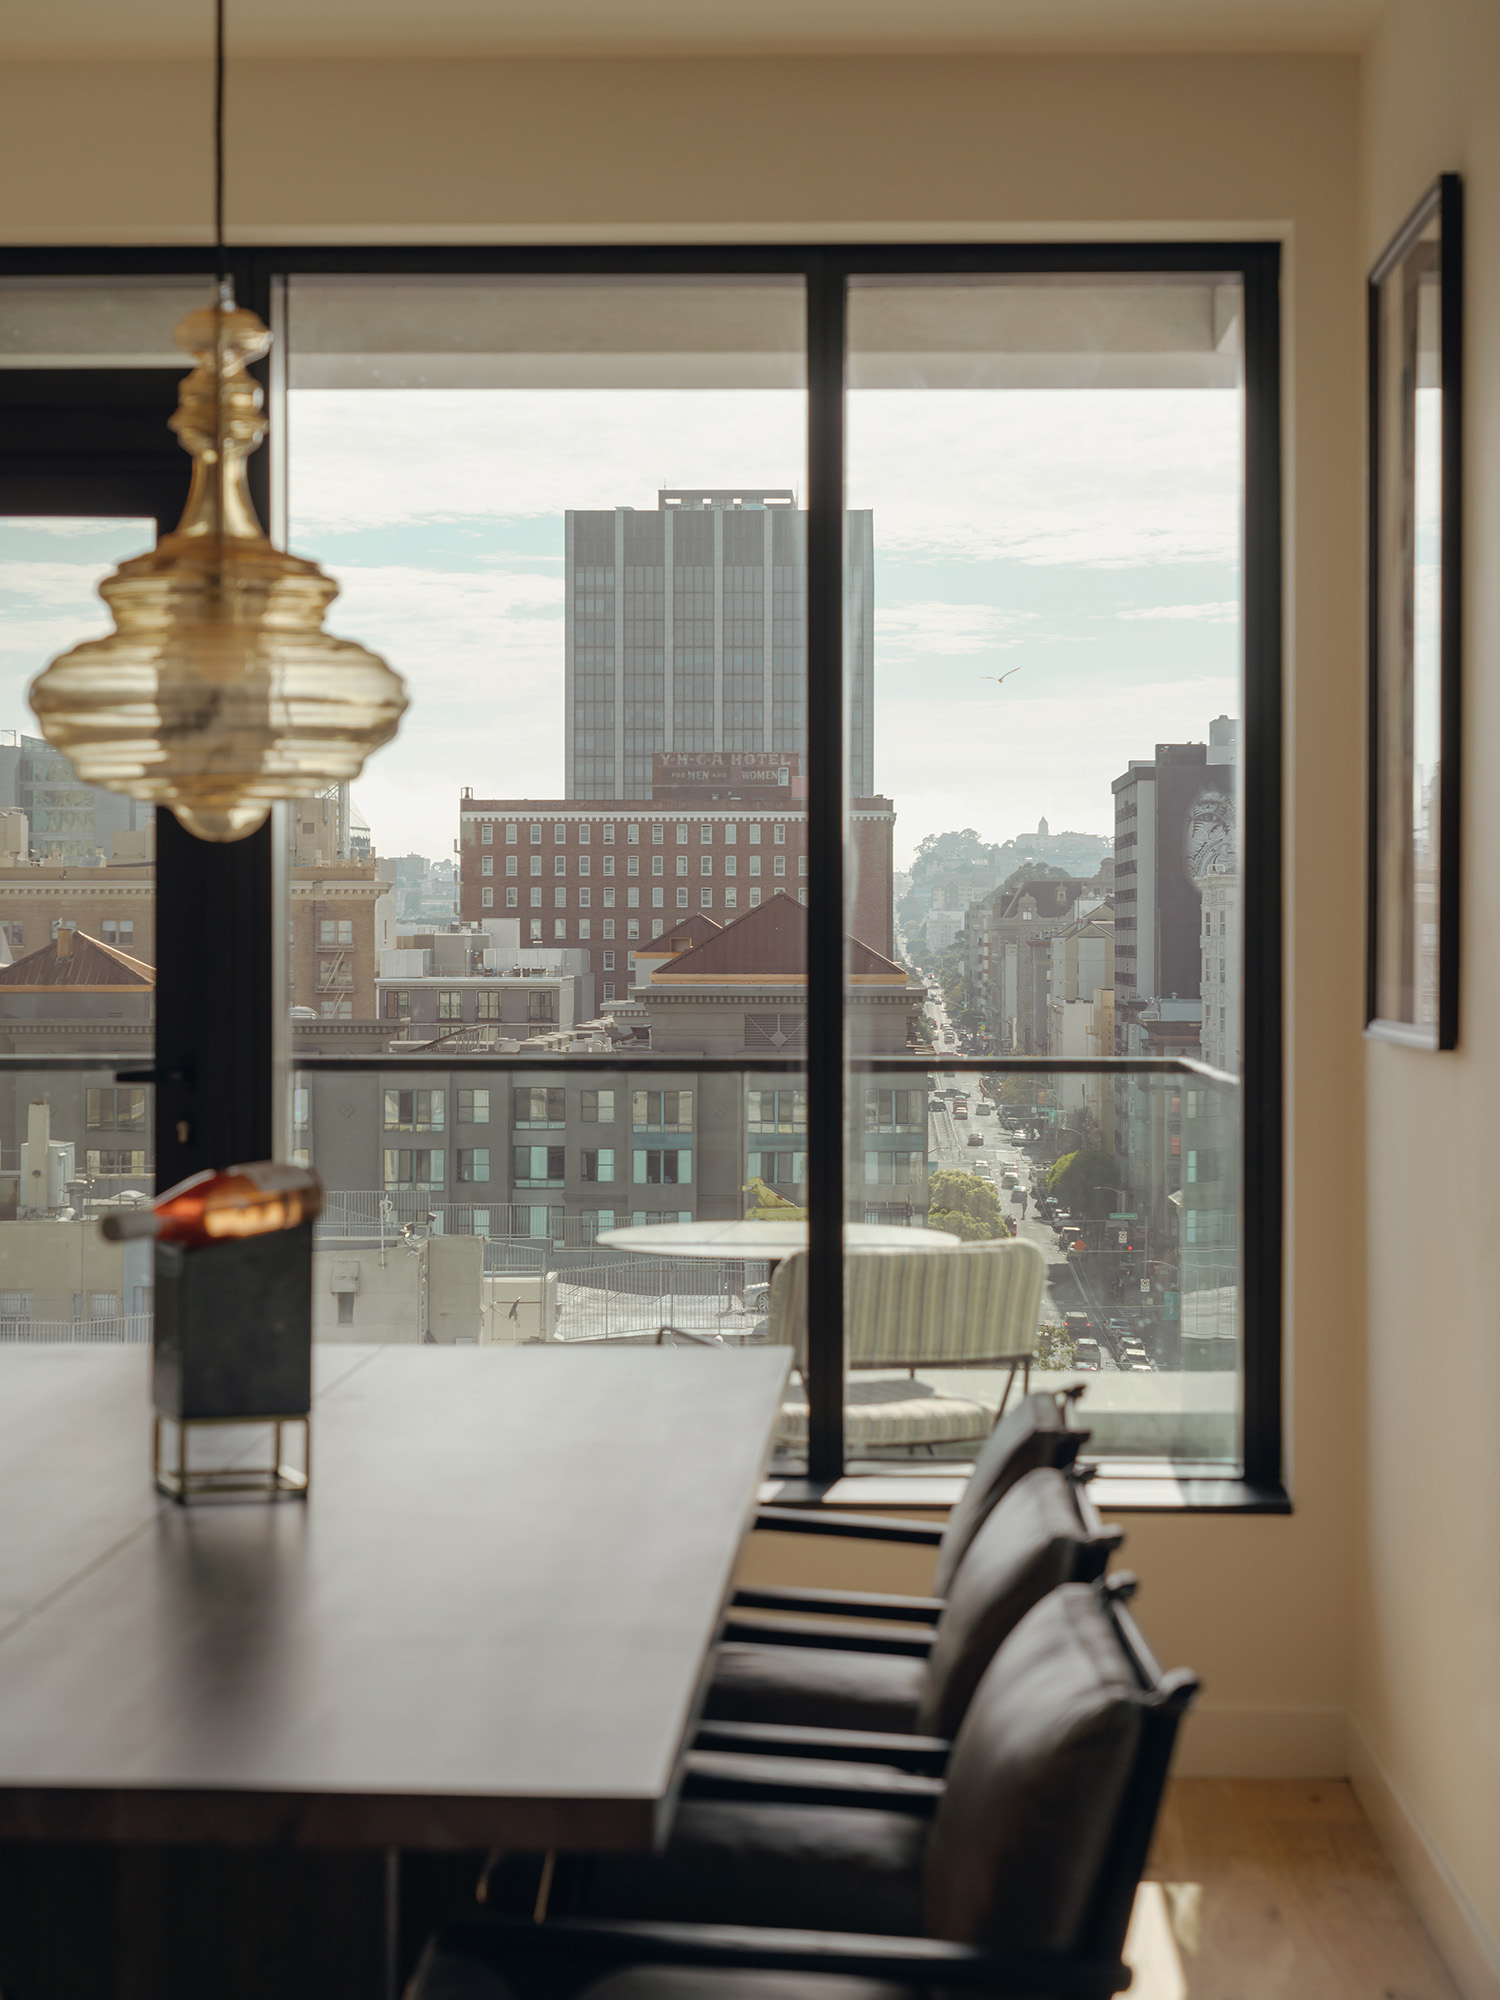 The skyline view seen from a dining table's perspective is captivating.